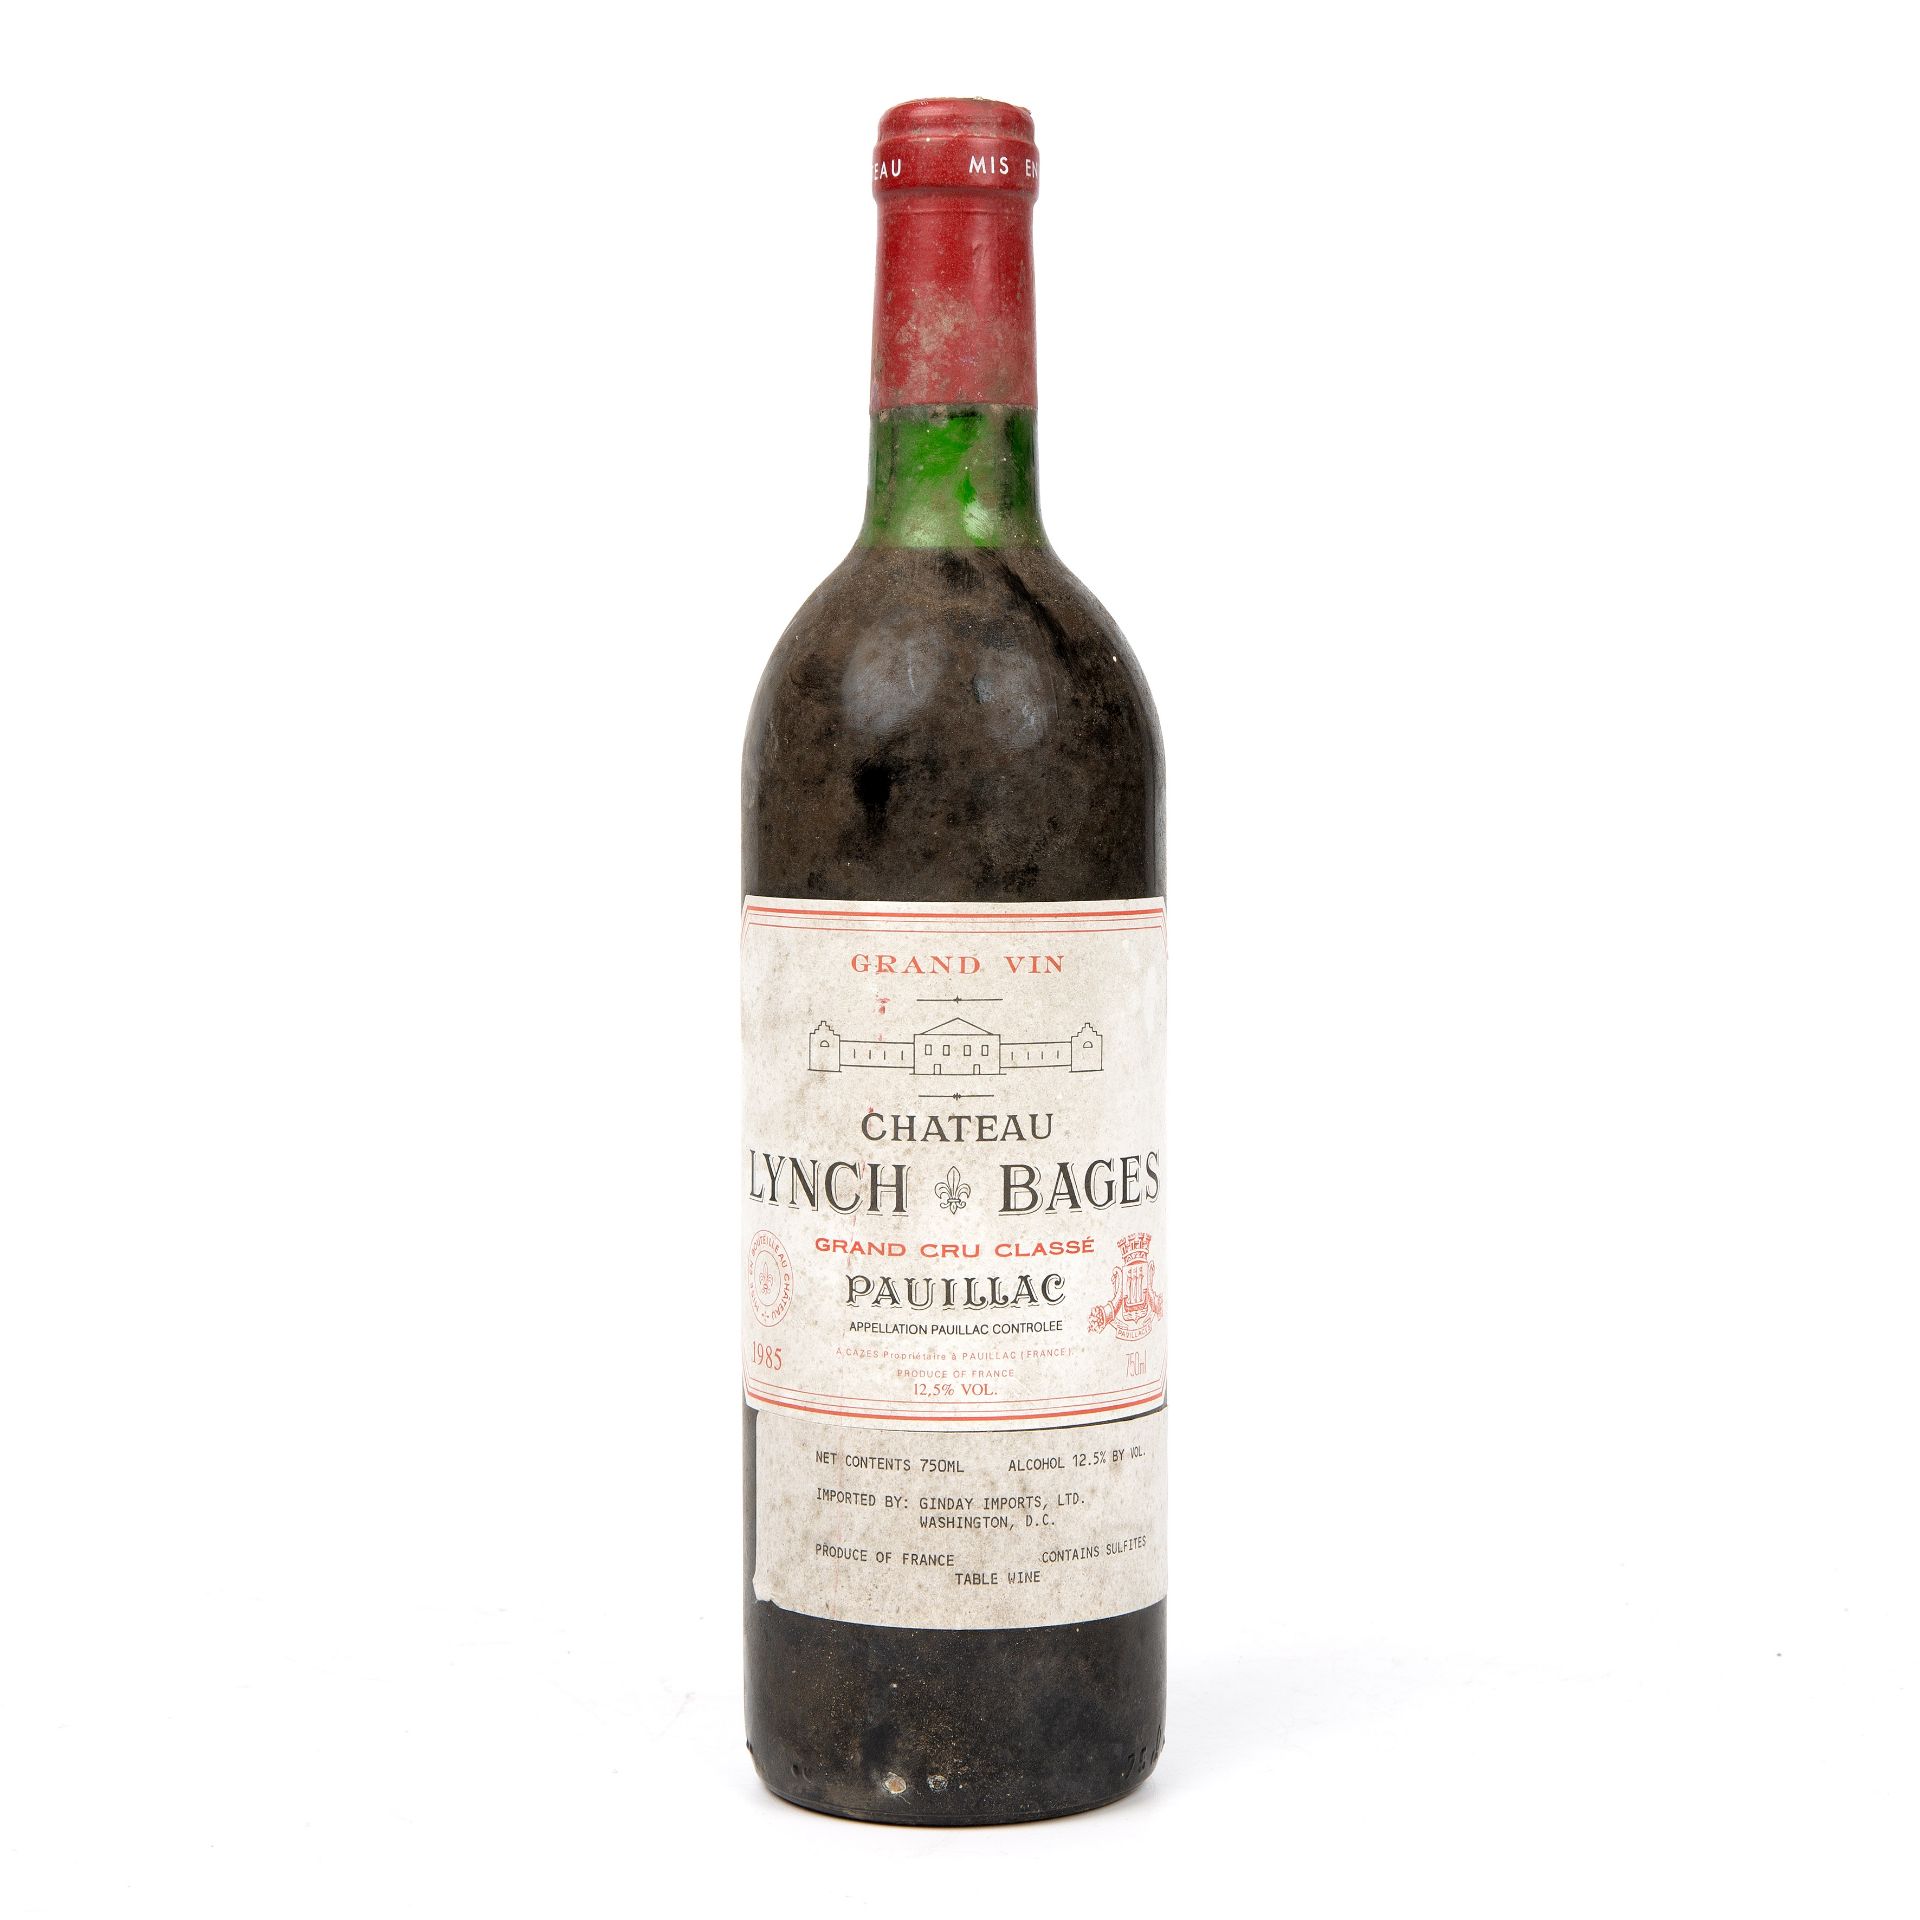 A bottle of 1985 Chateau Lynch-Bages, Pauillac, France